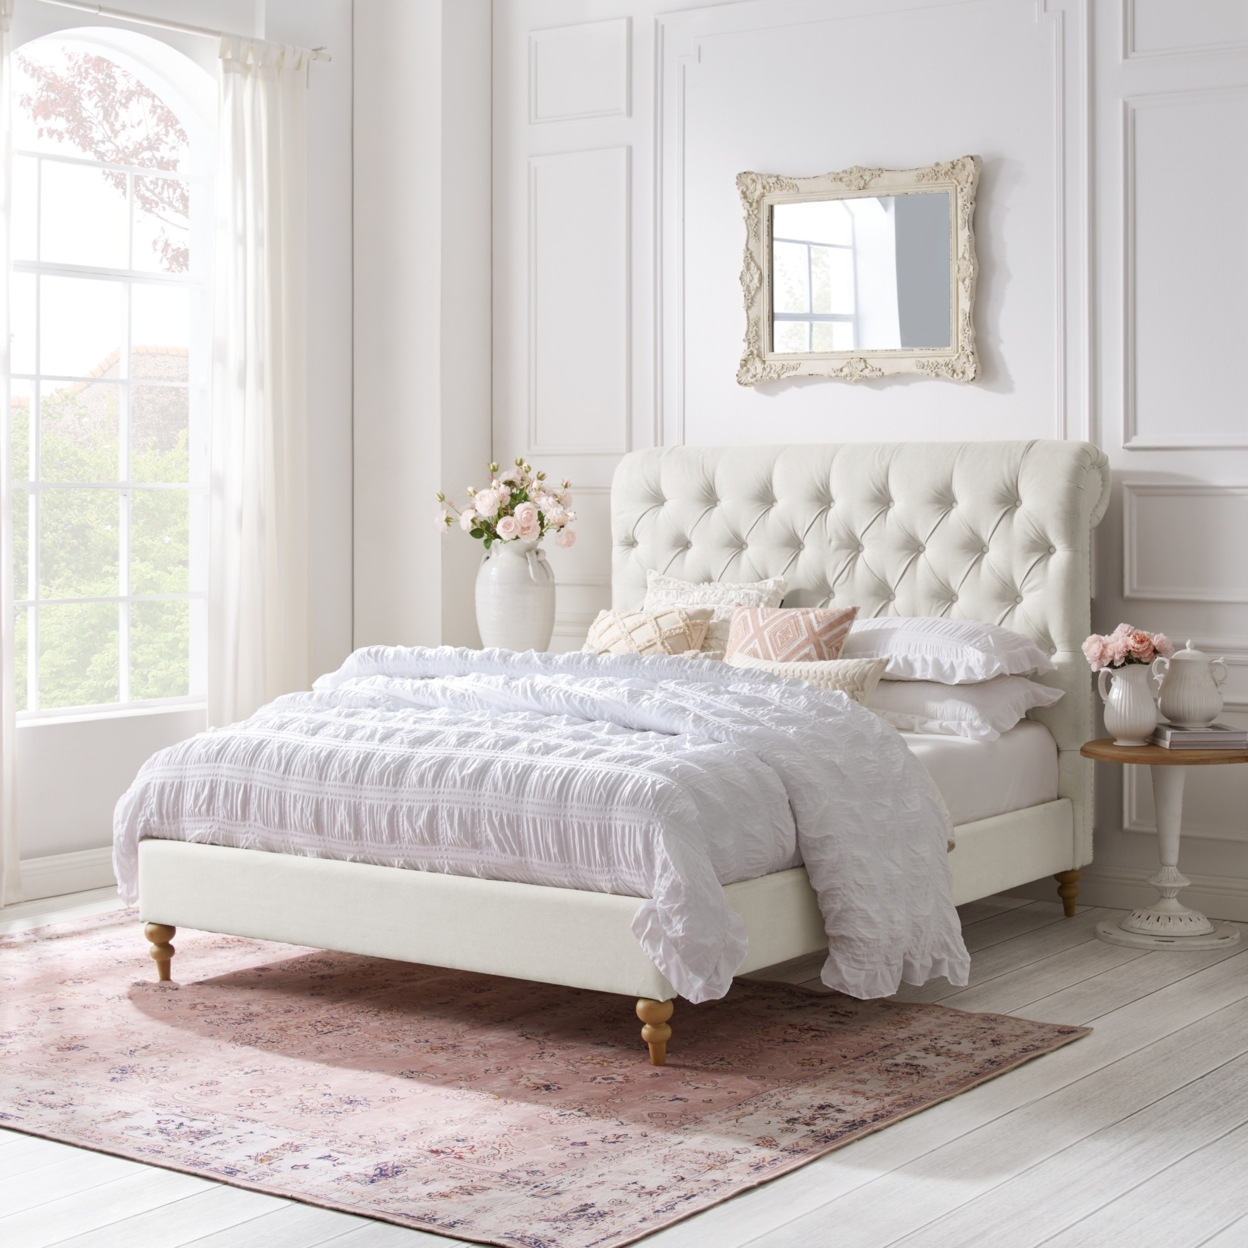 Kailynn Bed-Rolled Top Button Tufted-Nailhead Trim-Slats Included - Cream White, Queen